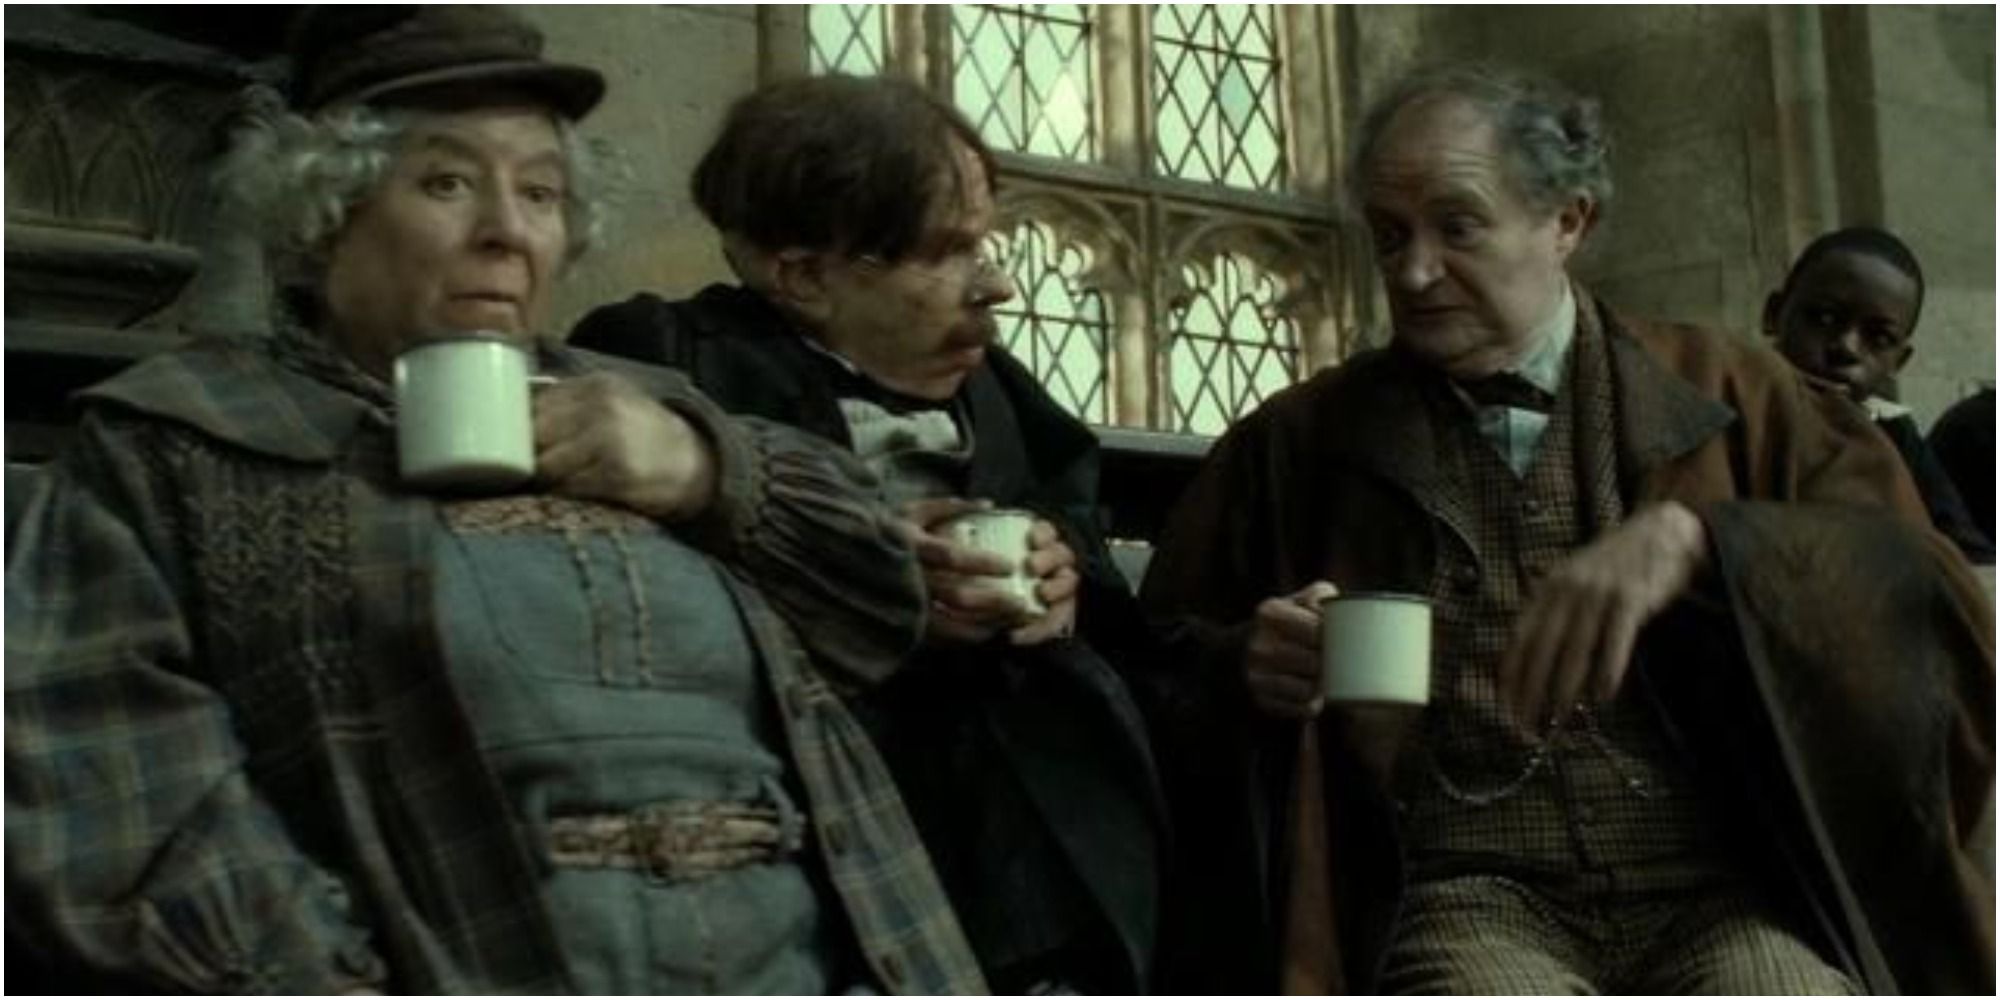 A screenshot of Professors Pomona Sprout, Filius Flitwick and Horace Slughorn chatting from Harry Potter and the Deathly Hallows Part 2